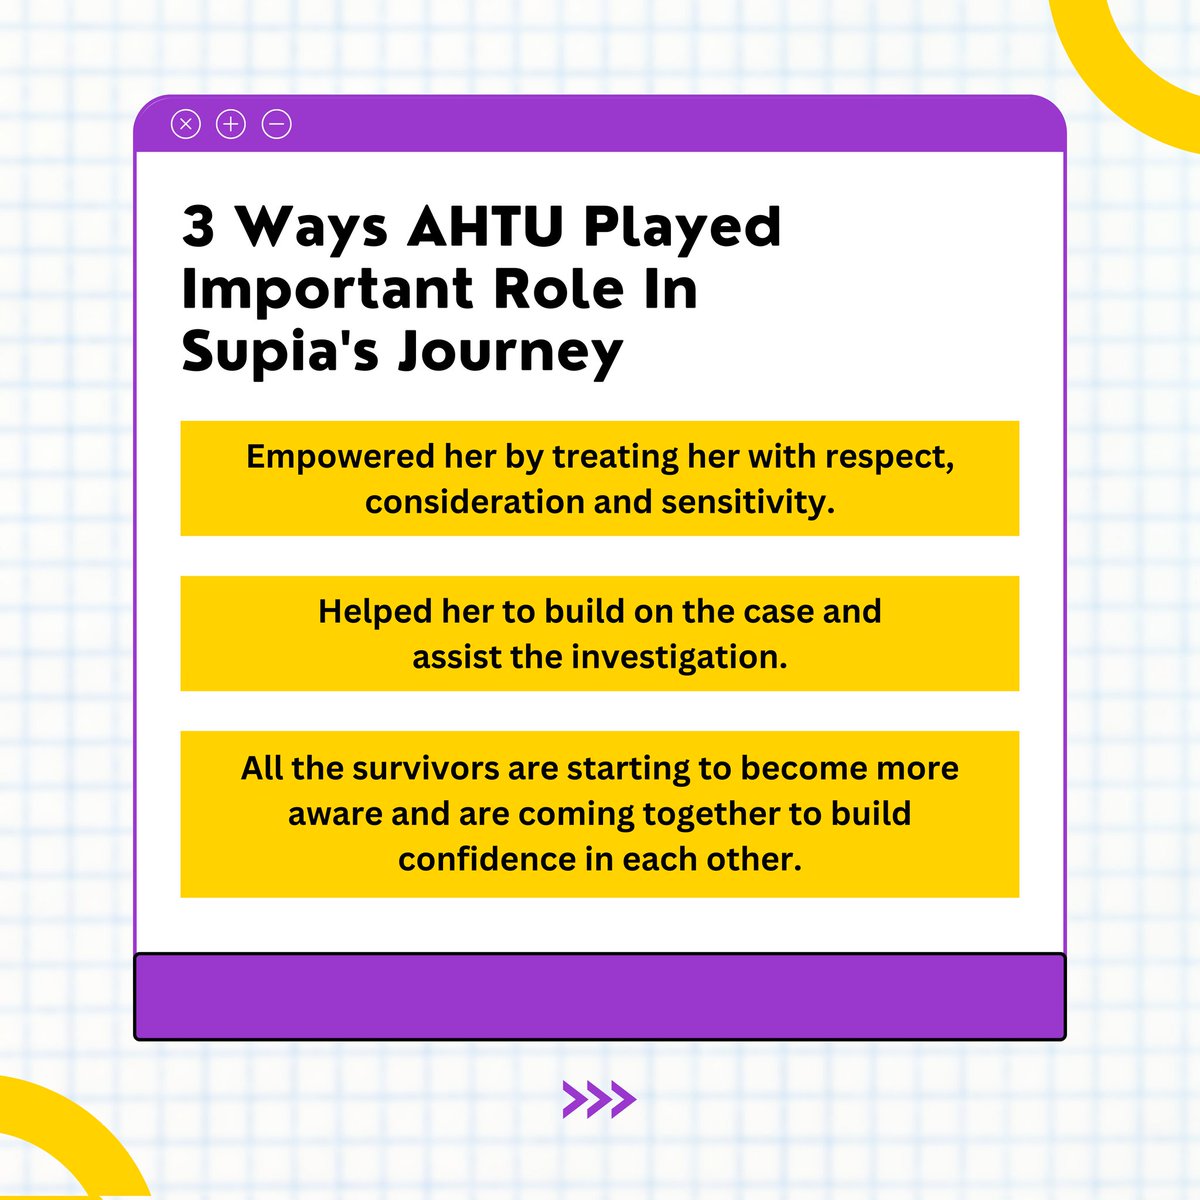 The entire process was efficiently facilitated because of the involvement of Anti Human Trafficking Units (AHTUs).

#ilfat #survivorleaders #survivorsofhumantrafficking #humantraffickingsurvivors #humantrafficking #ahtu #ahtus
#antihumantraffickingunits